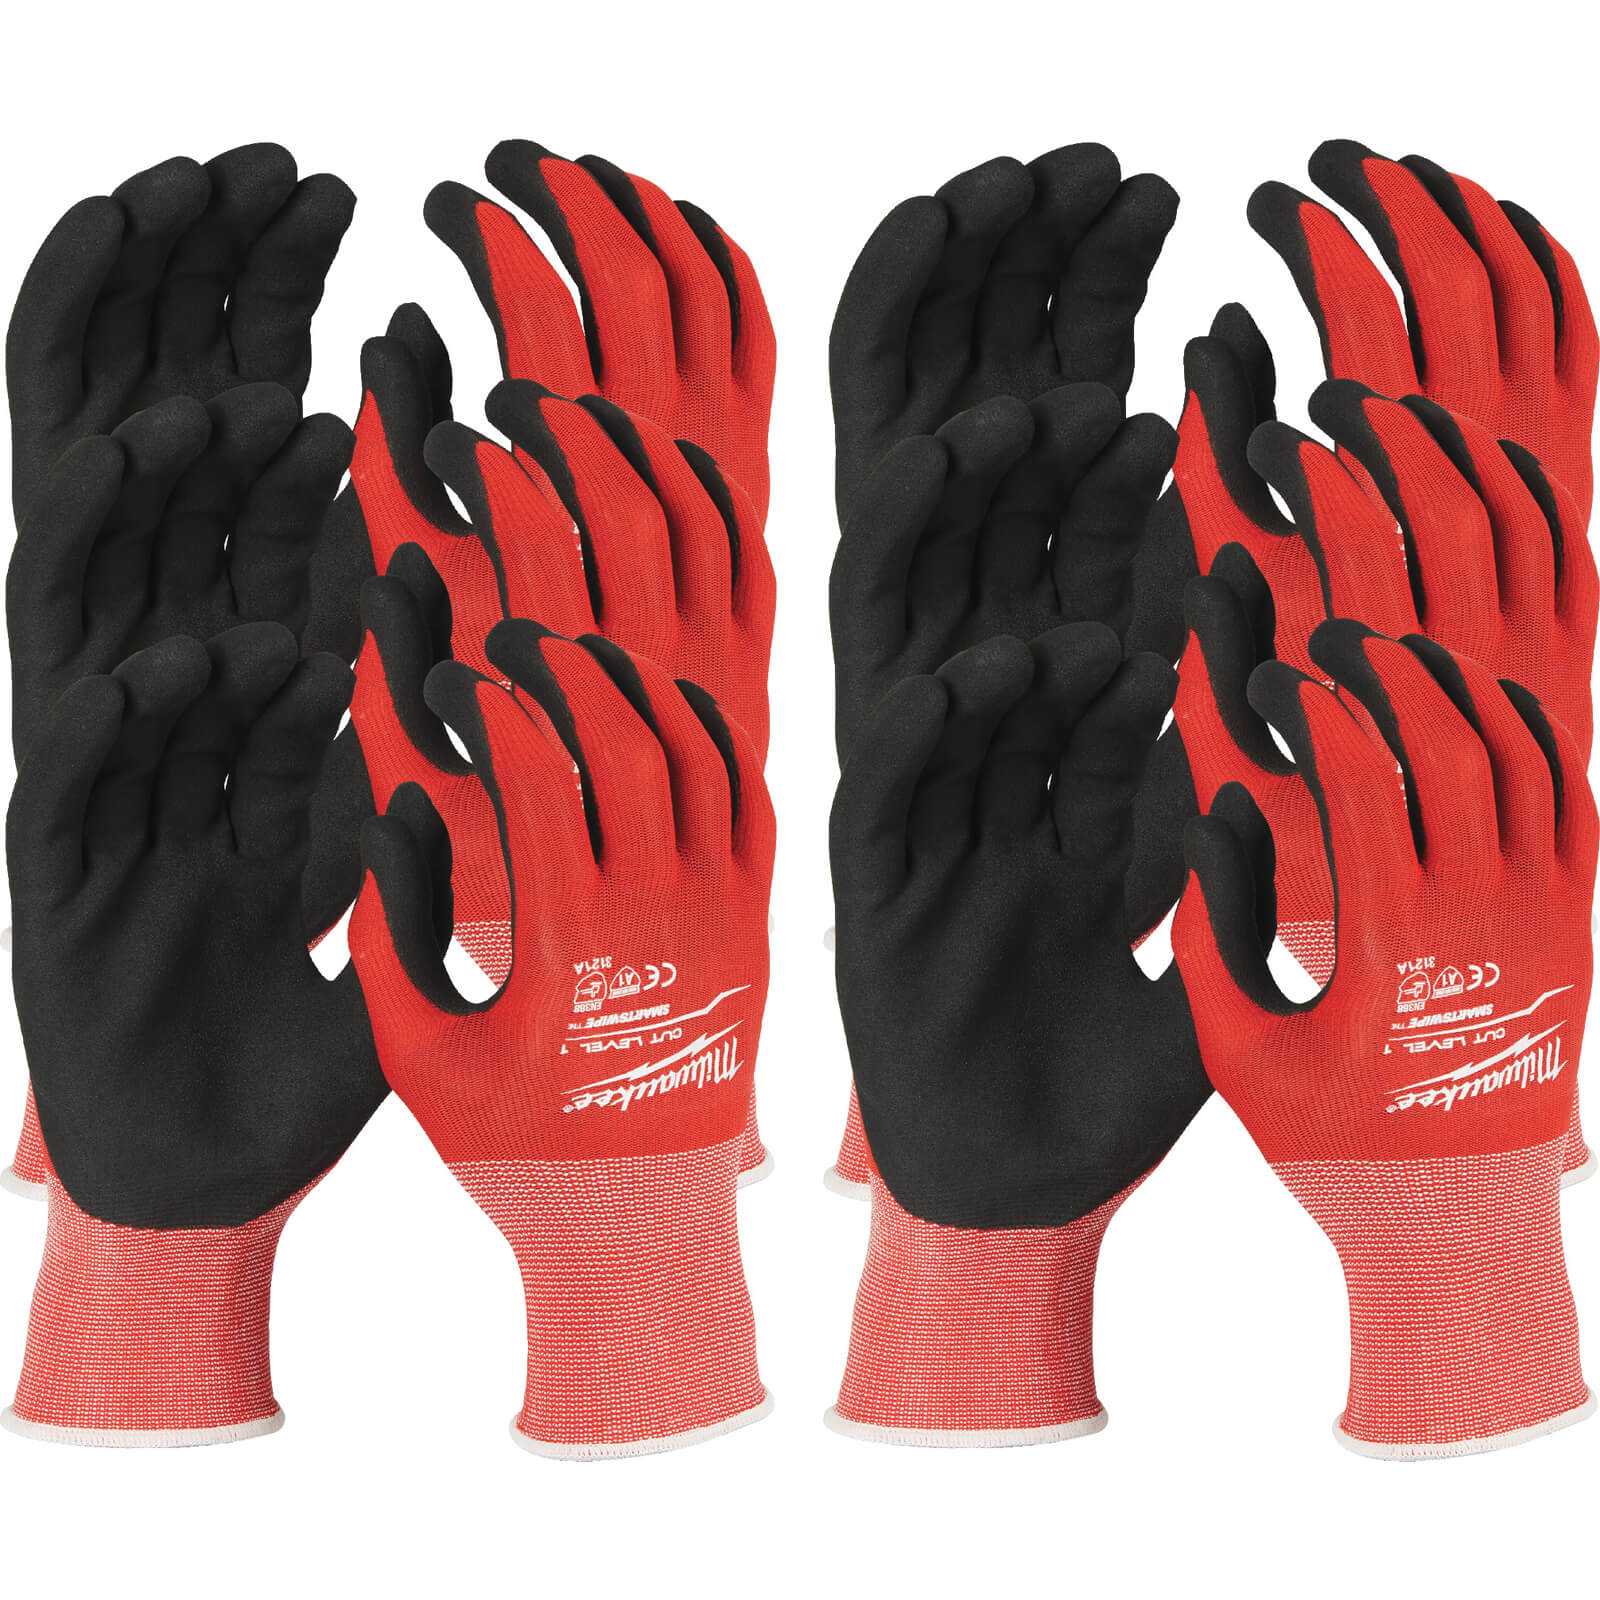 Image of Milwaukee Cut Level 1 Dipped Work Gloves Black / Red 2XL Pack of 12